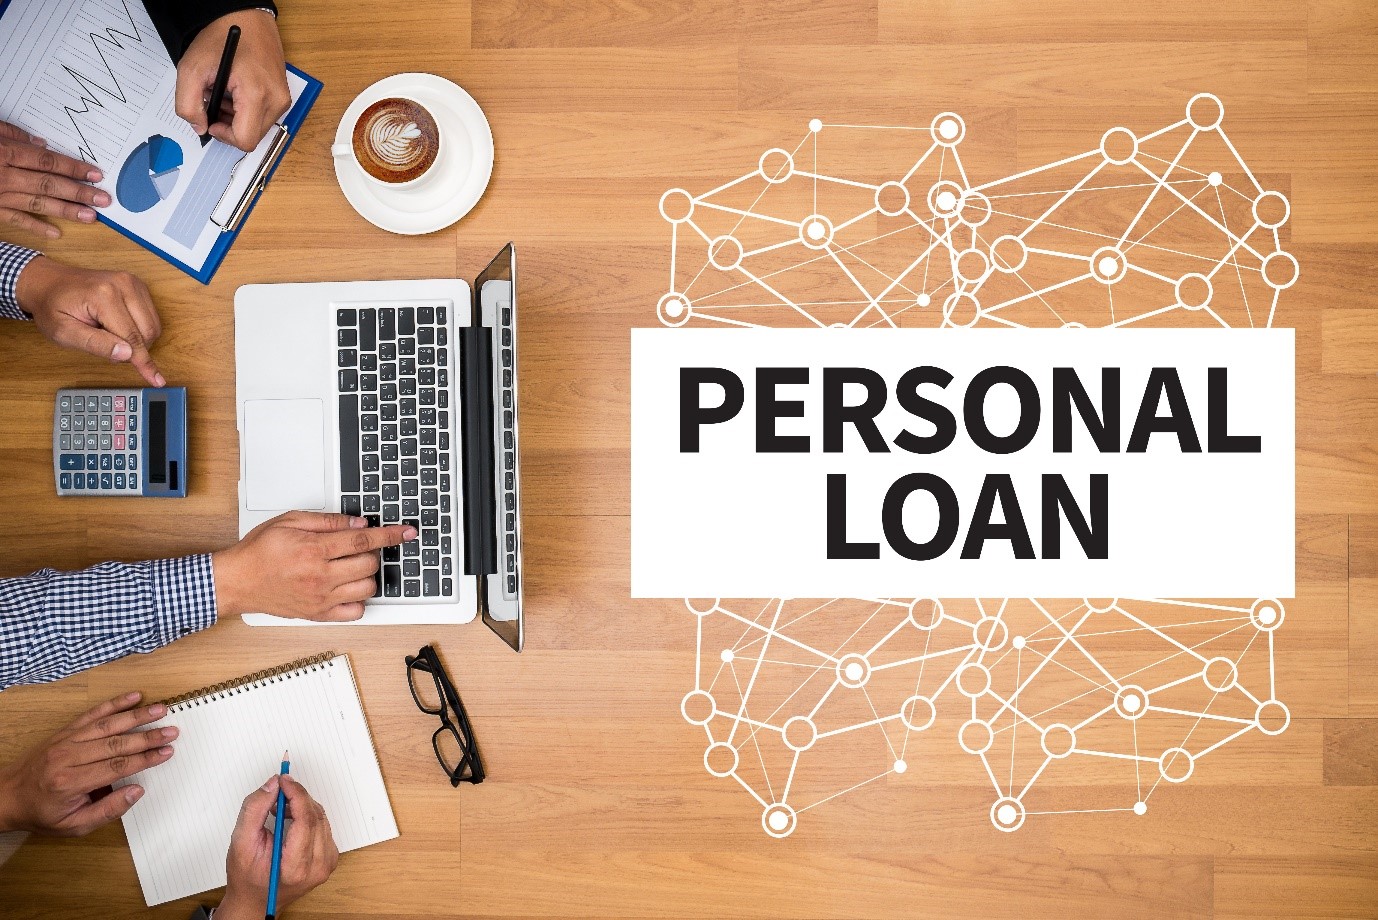 Clix personal loan